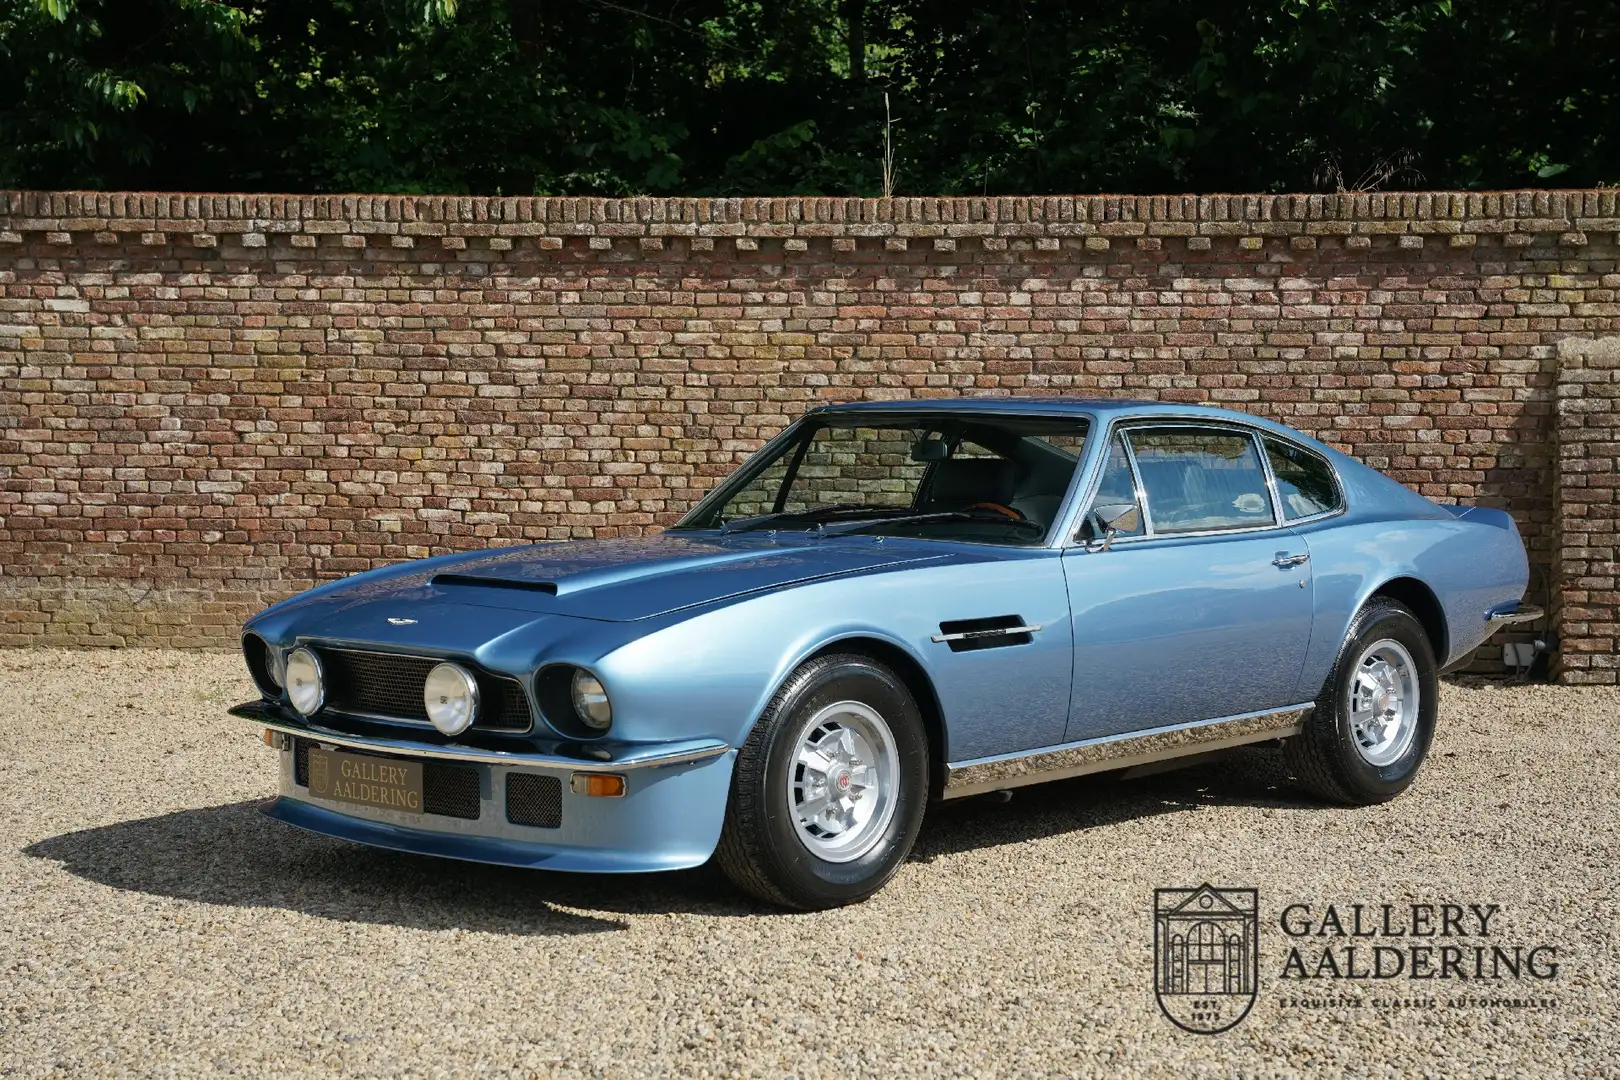 Aston Martin DBS Rare and sought after manual gearbox version with Azul - 1